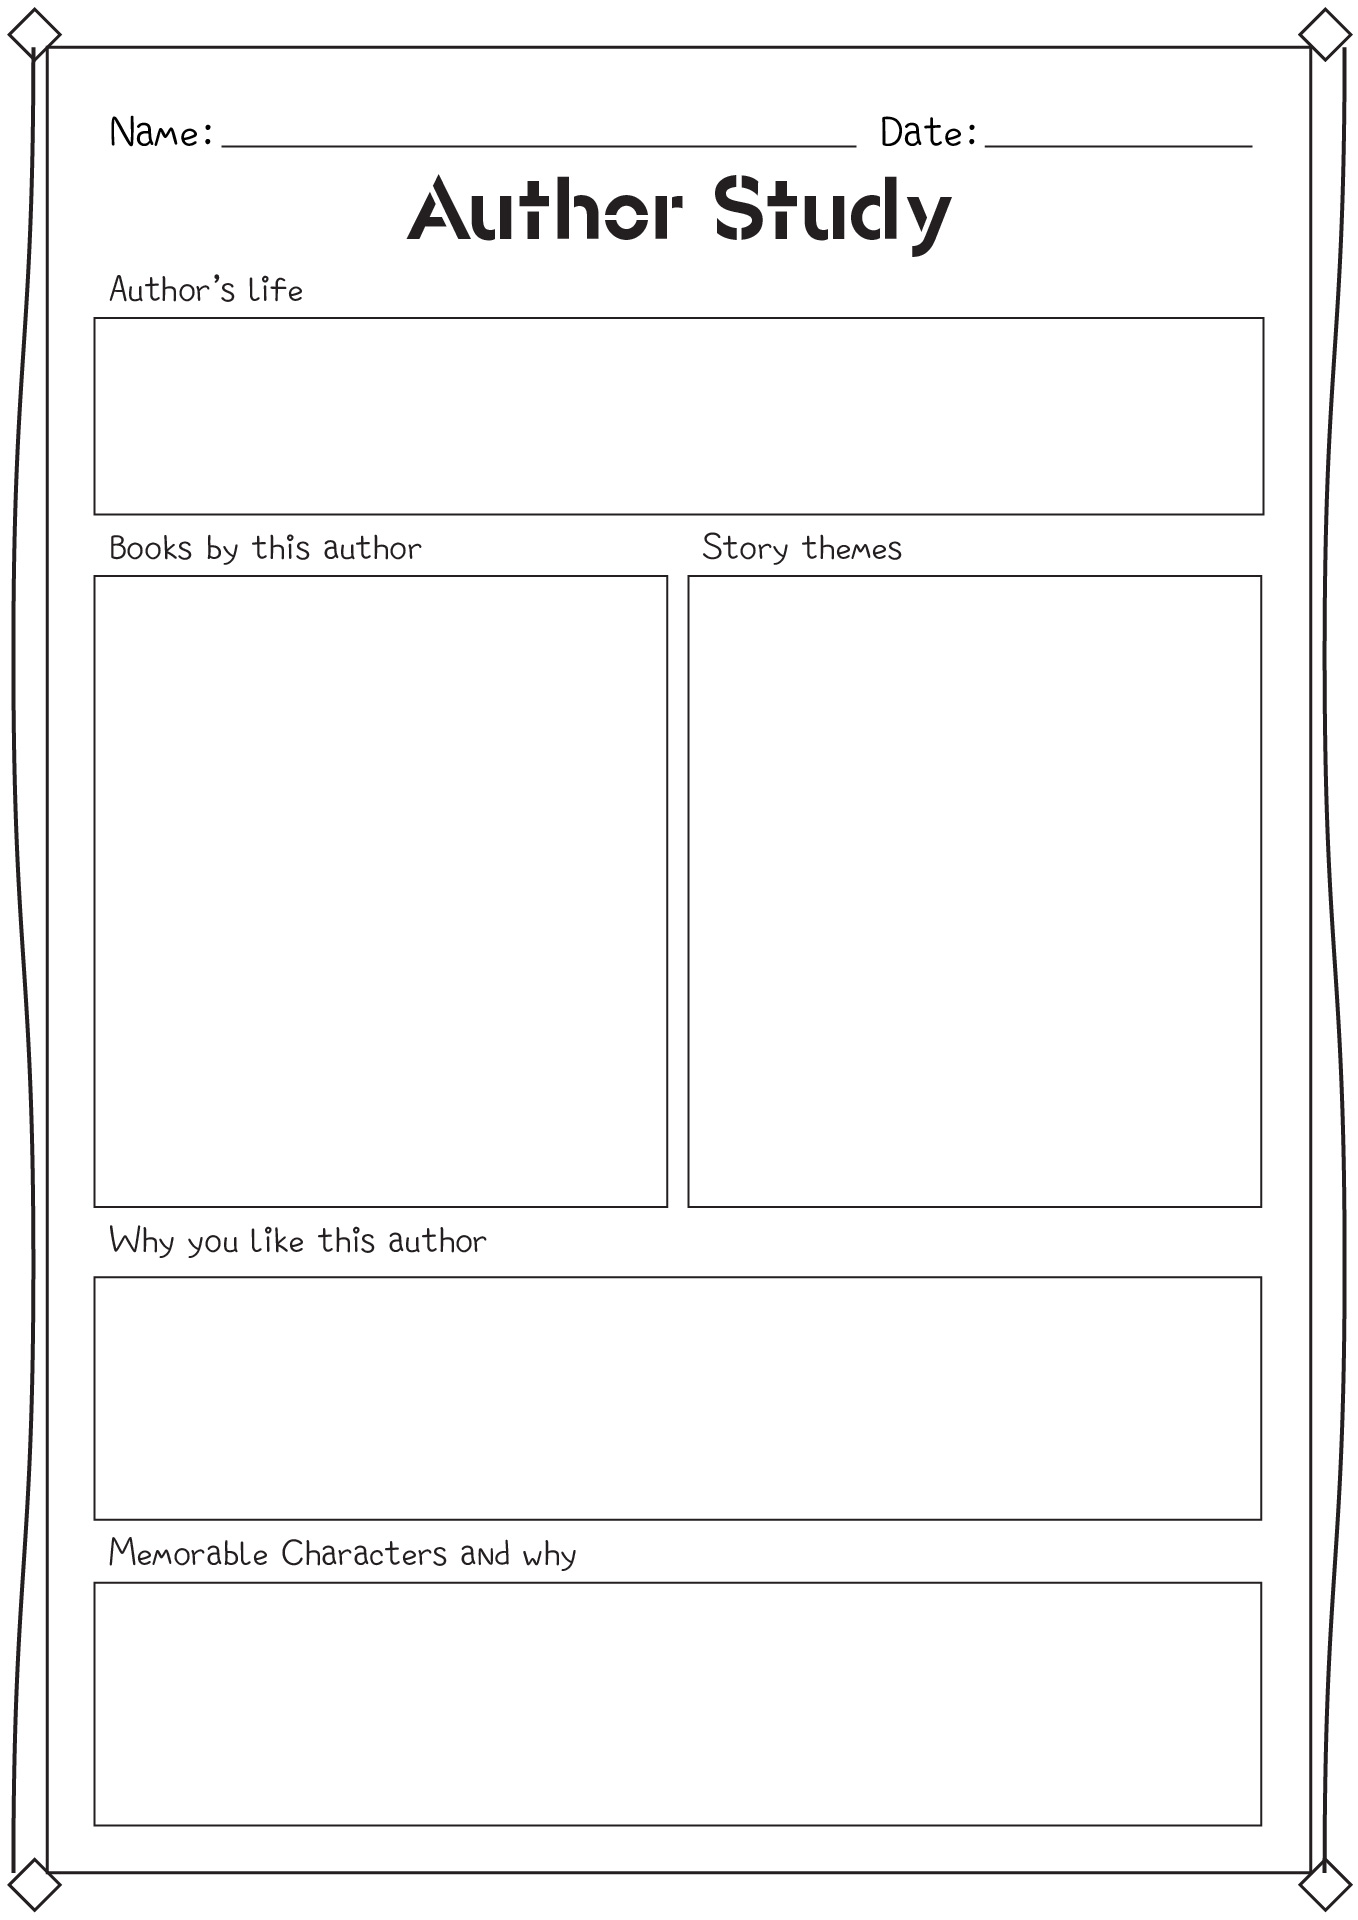 15-best-images-of-daily-journal-worksheet-for-students-special